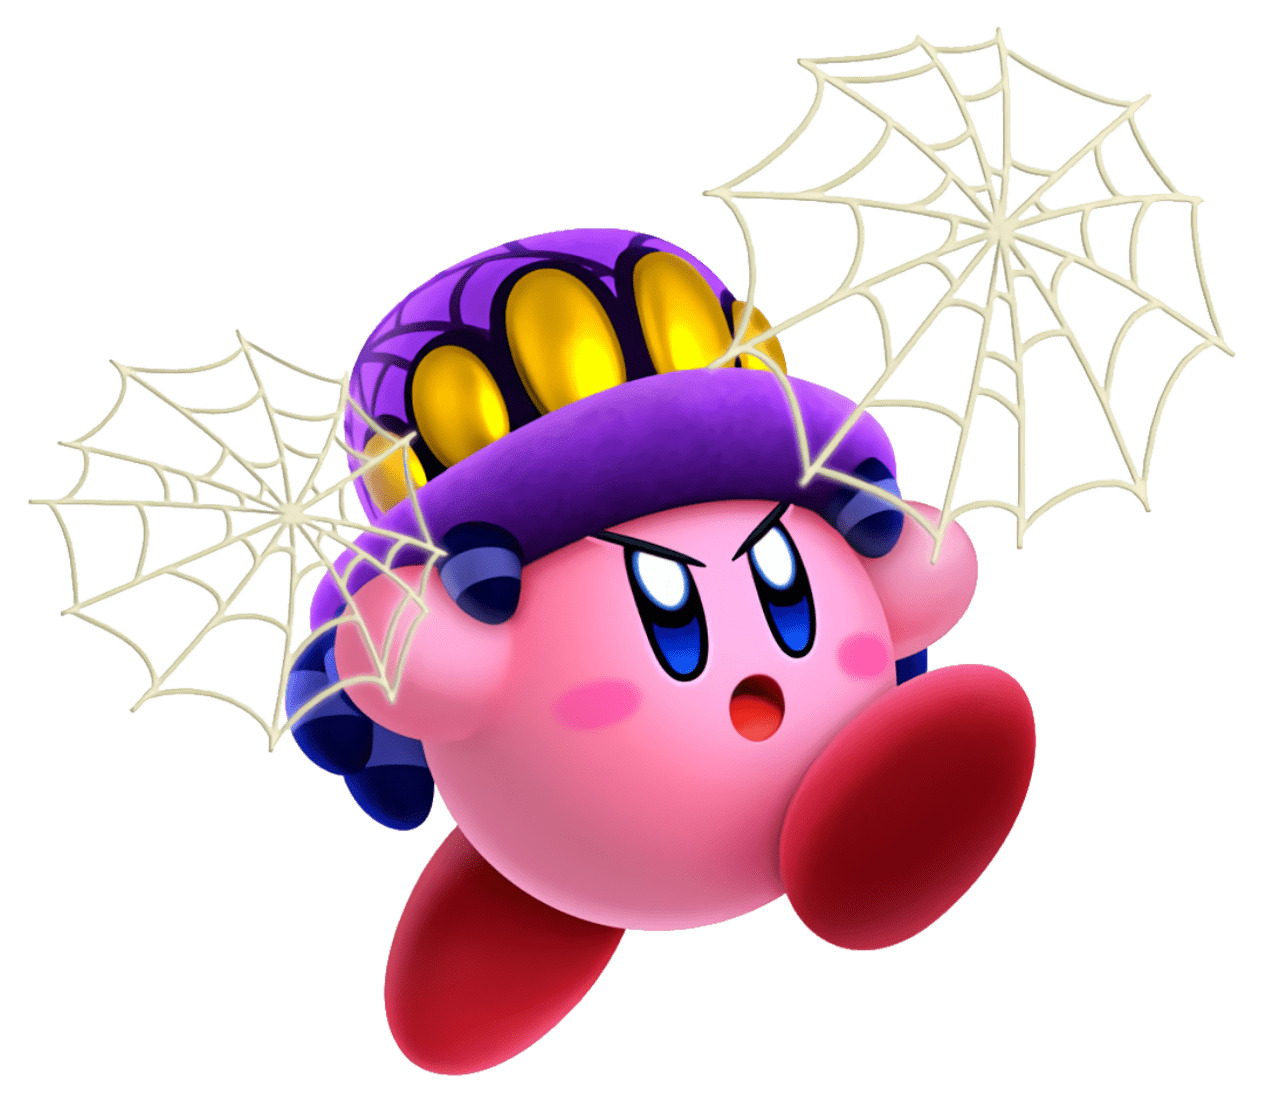 Spider Kirby icons